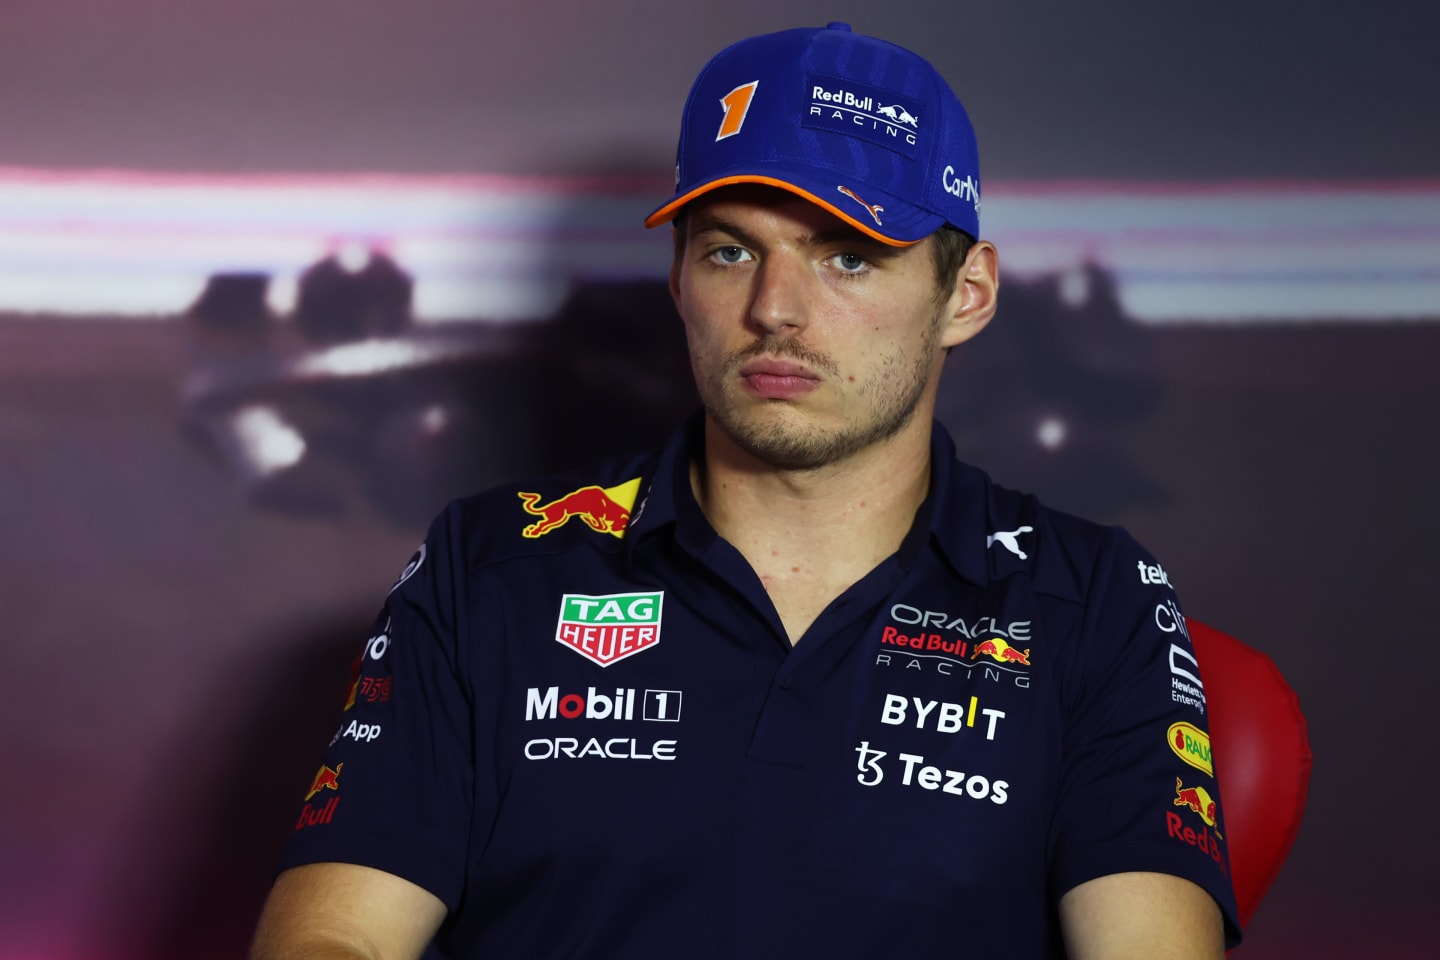 ZANDVOORT, NETHERLANDS - SEPTEMBER 01: Max Verstappen of the Netherlands and Oracle Red Bull Racing looks on in the Drivers Press Conference during previews ahead of the F1 Grand Prix of The Netherlands at Circuit Zandvoort on September 01, 2022 in Zandvoort, Netherlands. (Photo by Lars Baron/Getty Images)